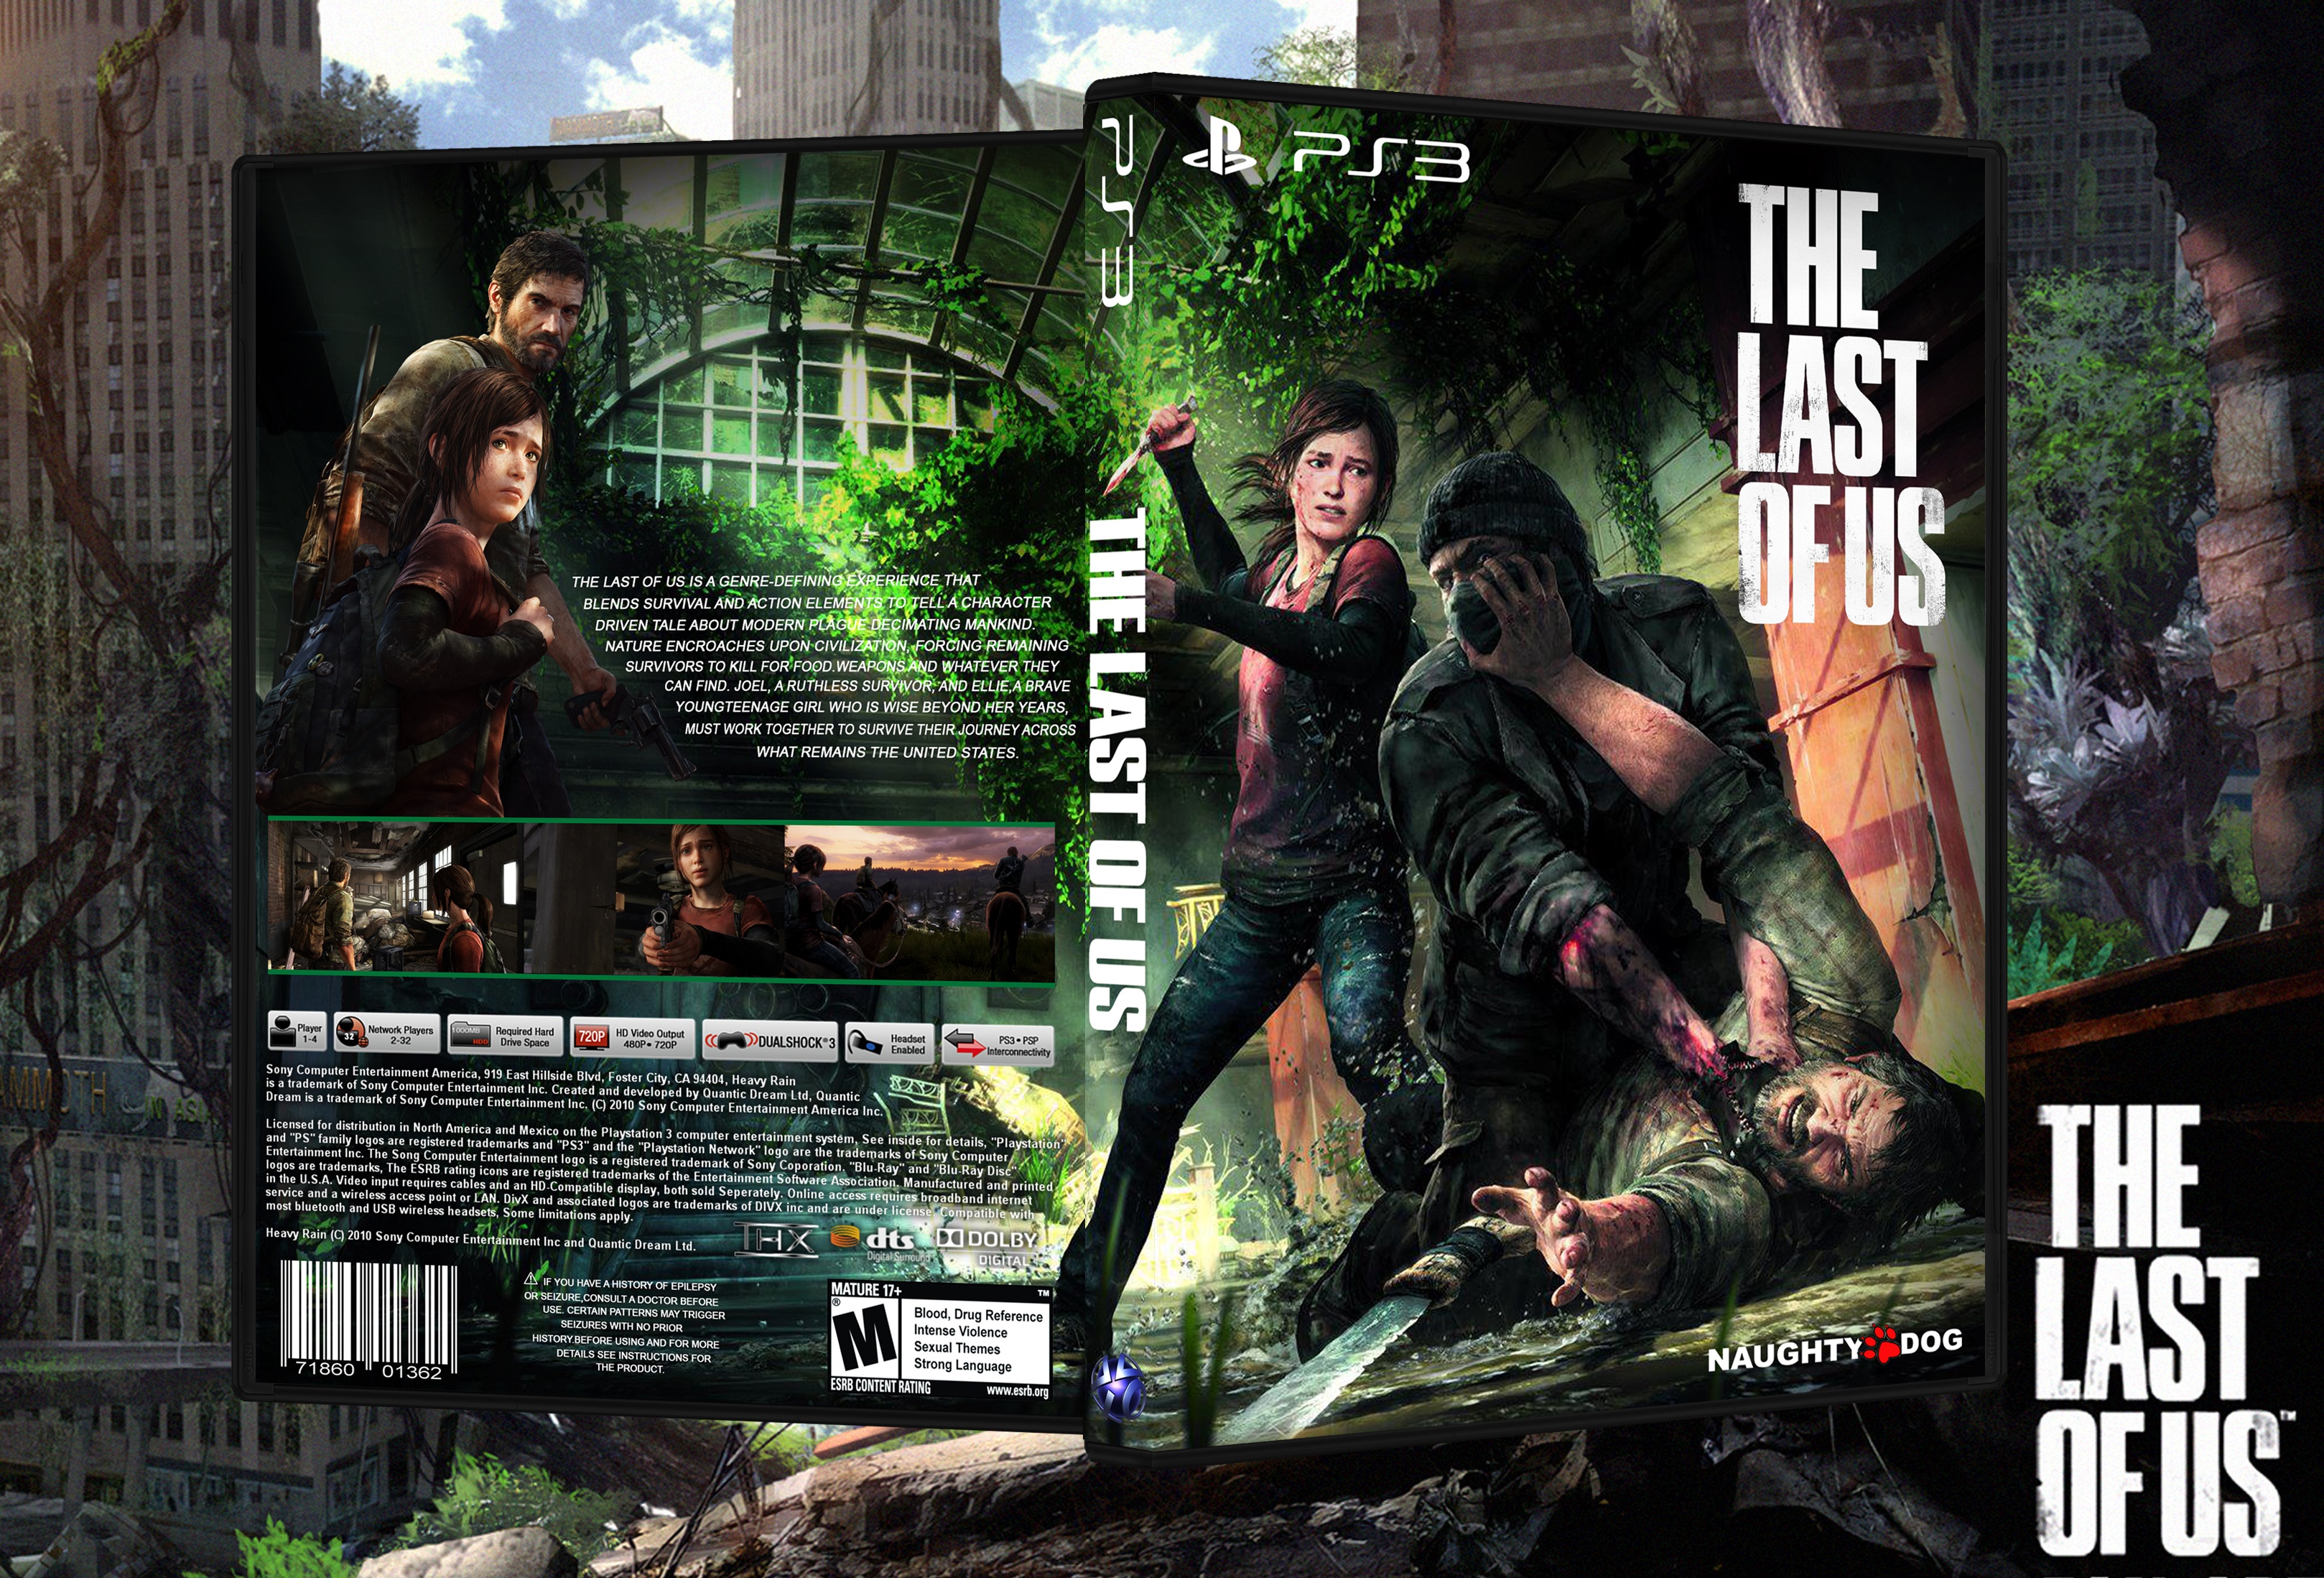 THE LAST OF US box cover